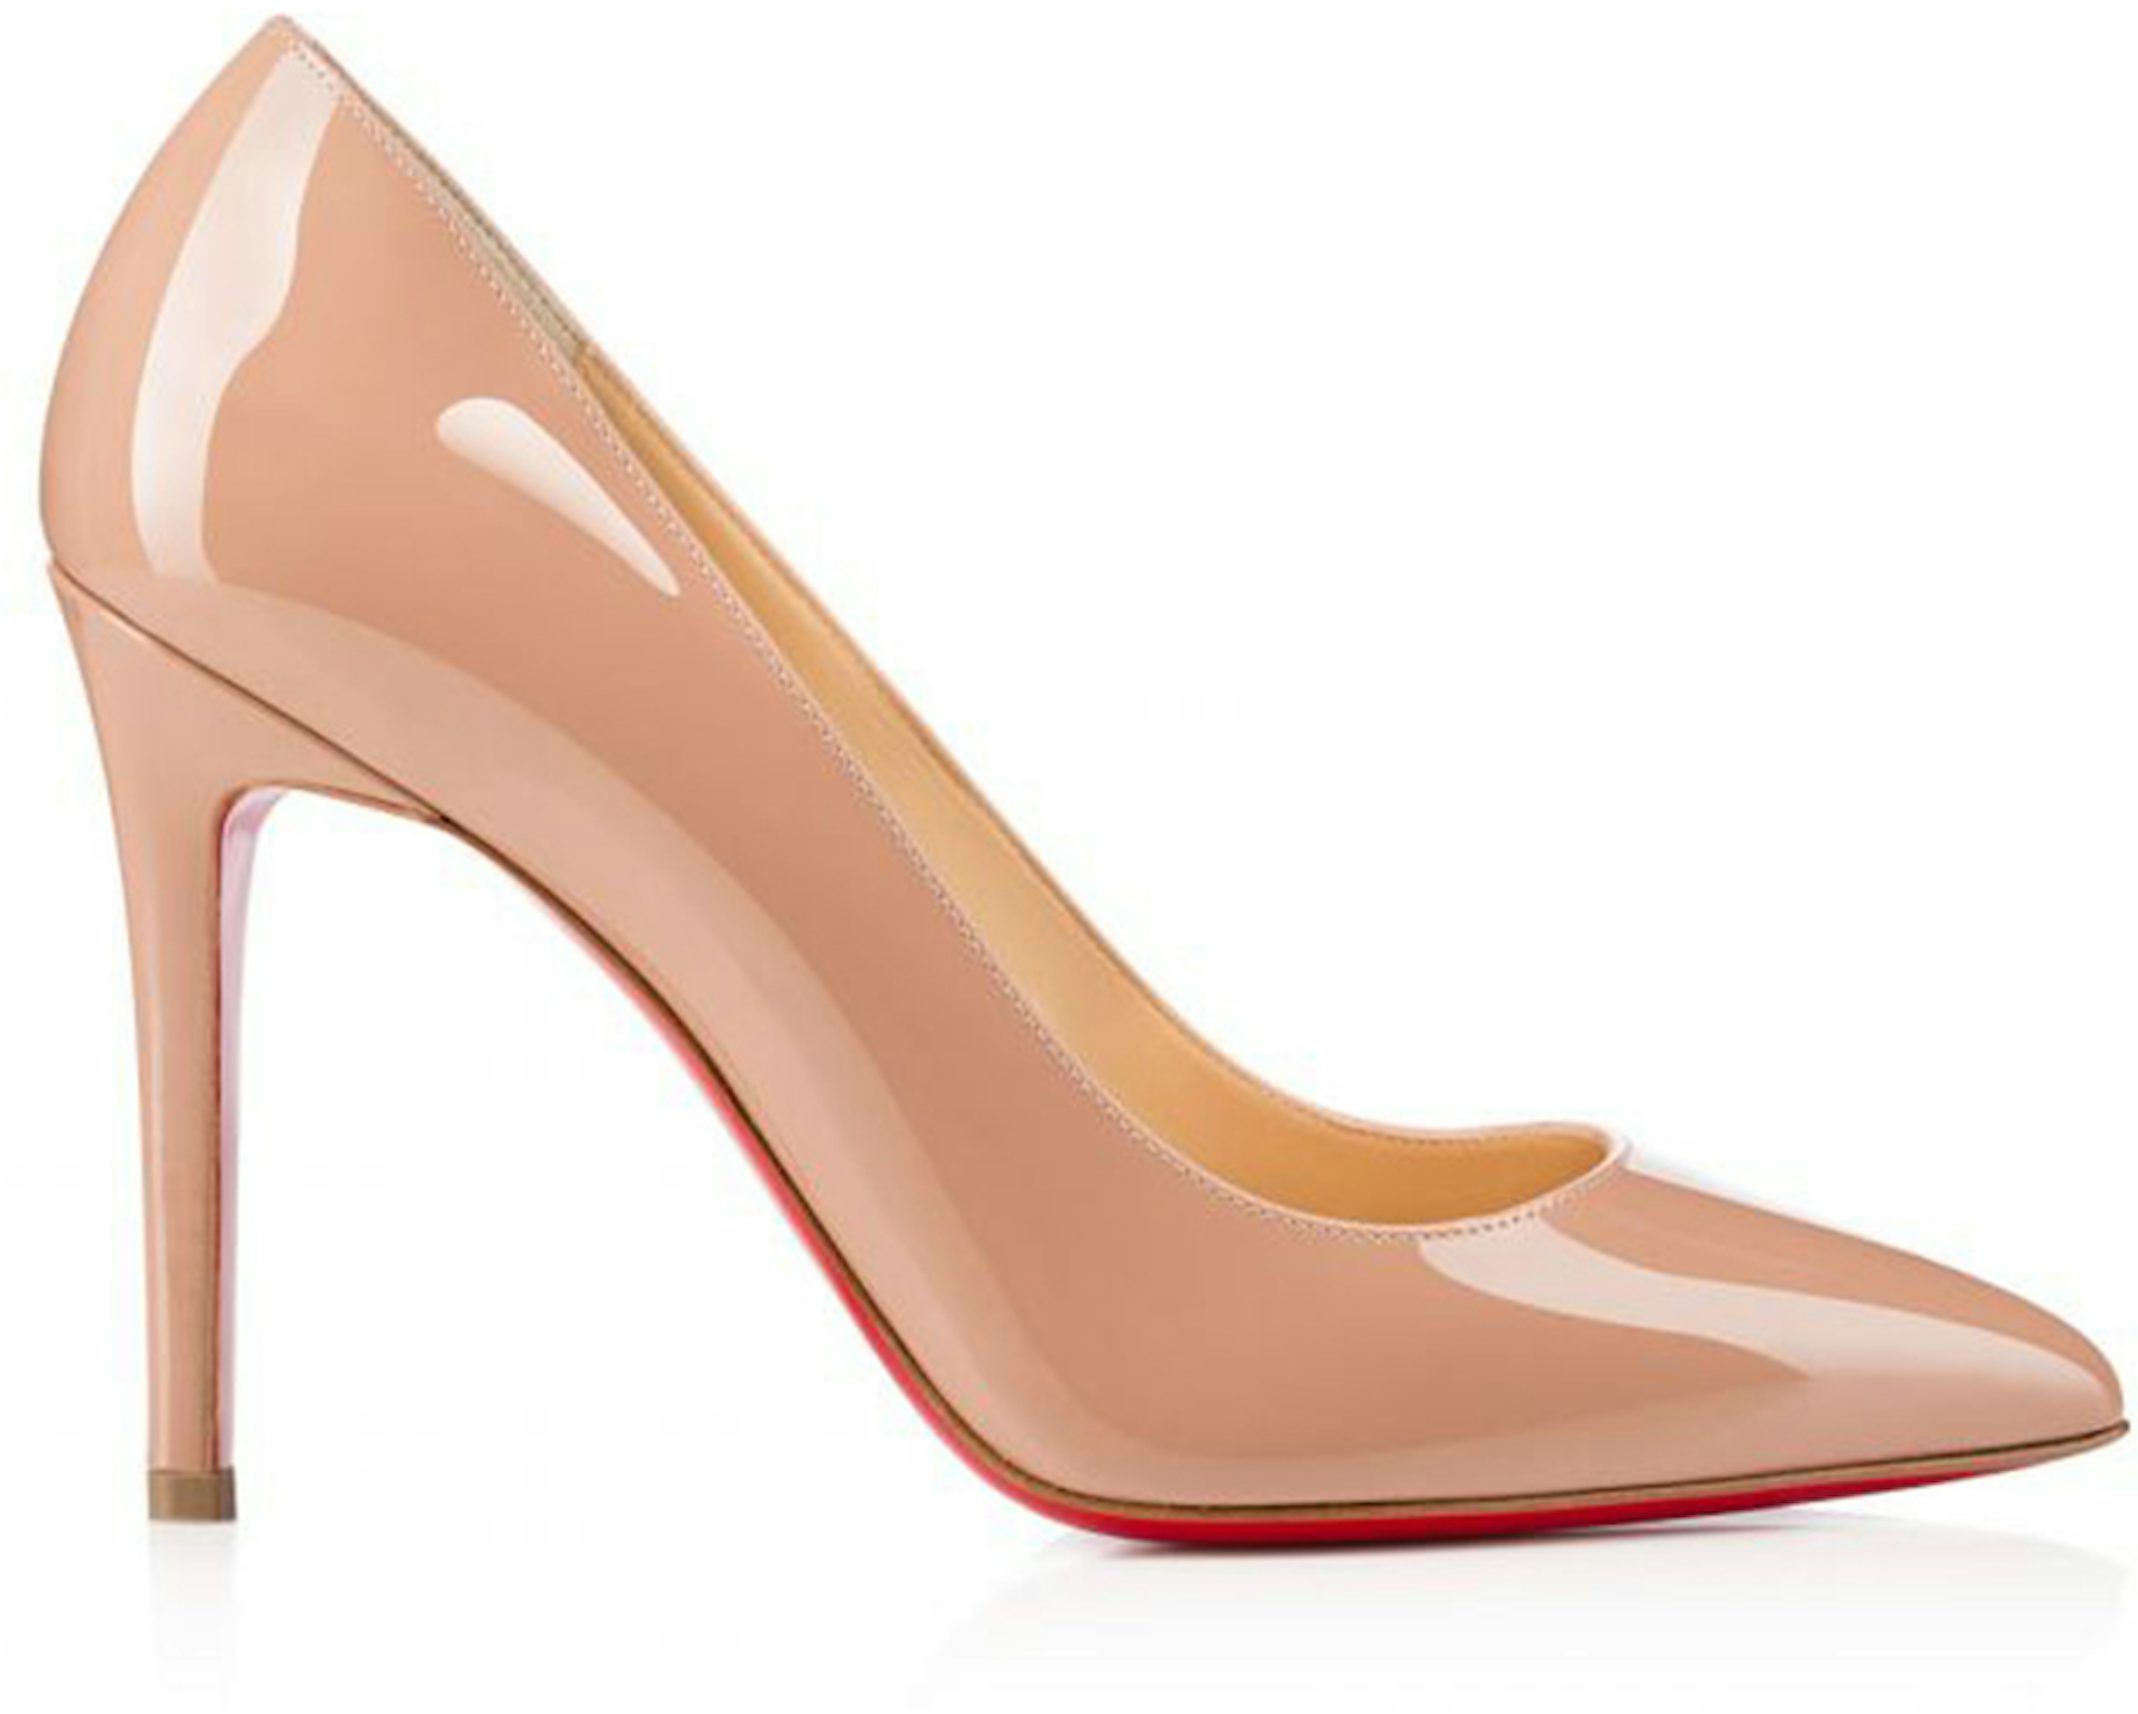 silke nær ved kaffe Christian Louboutin Pigalle 100mm Pump Nude Patent Leather - 3080680PK20 -  US